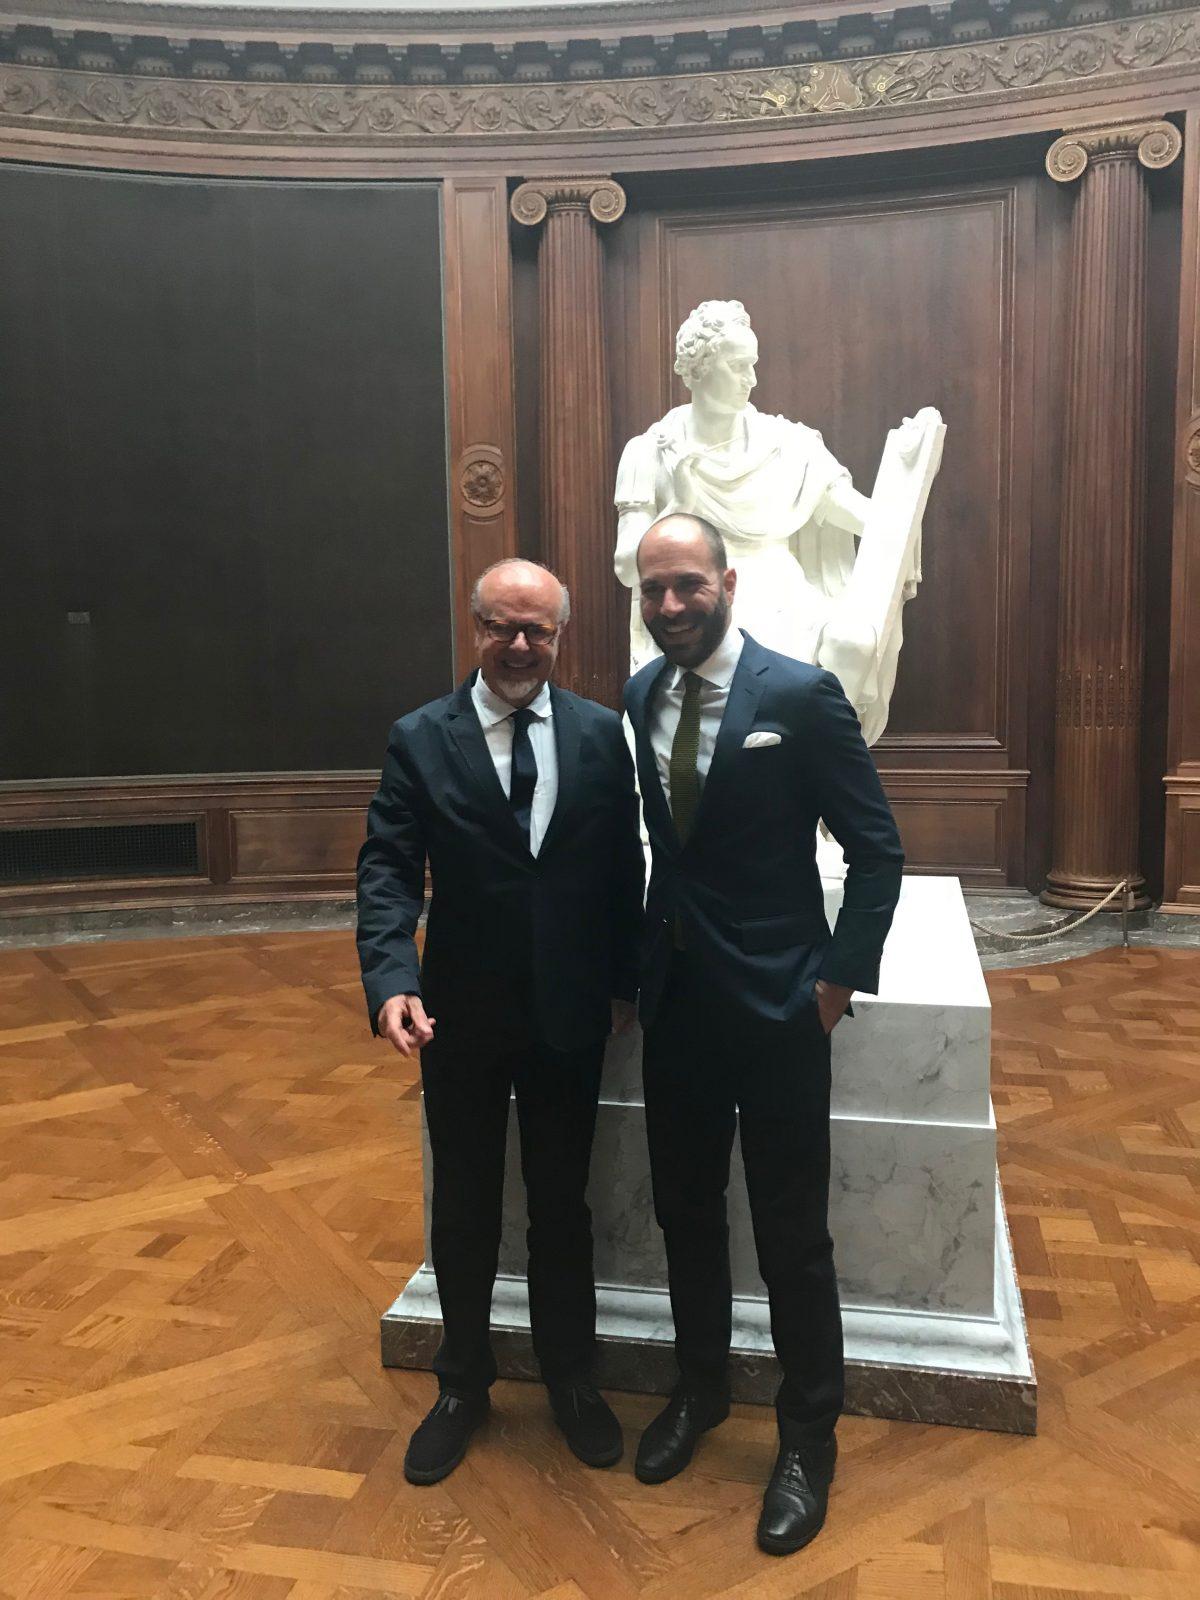 Mario Guderzo (L), director of the Gypsotheca e Museo Antonio Canova, and Xavier F. Salomon, The Frick's Peter Jay Sharp chief curator, at The Frick Collection on May 21, 2018. (Milene Fernandez/The Epoch Times)